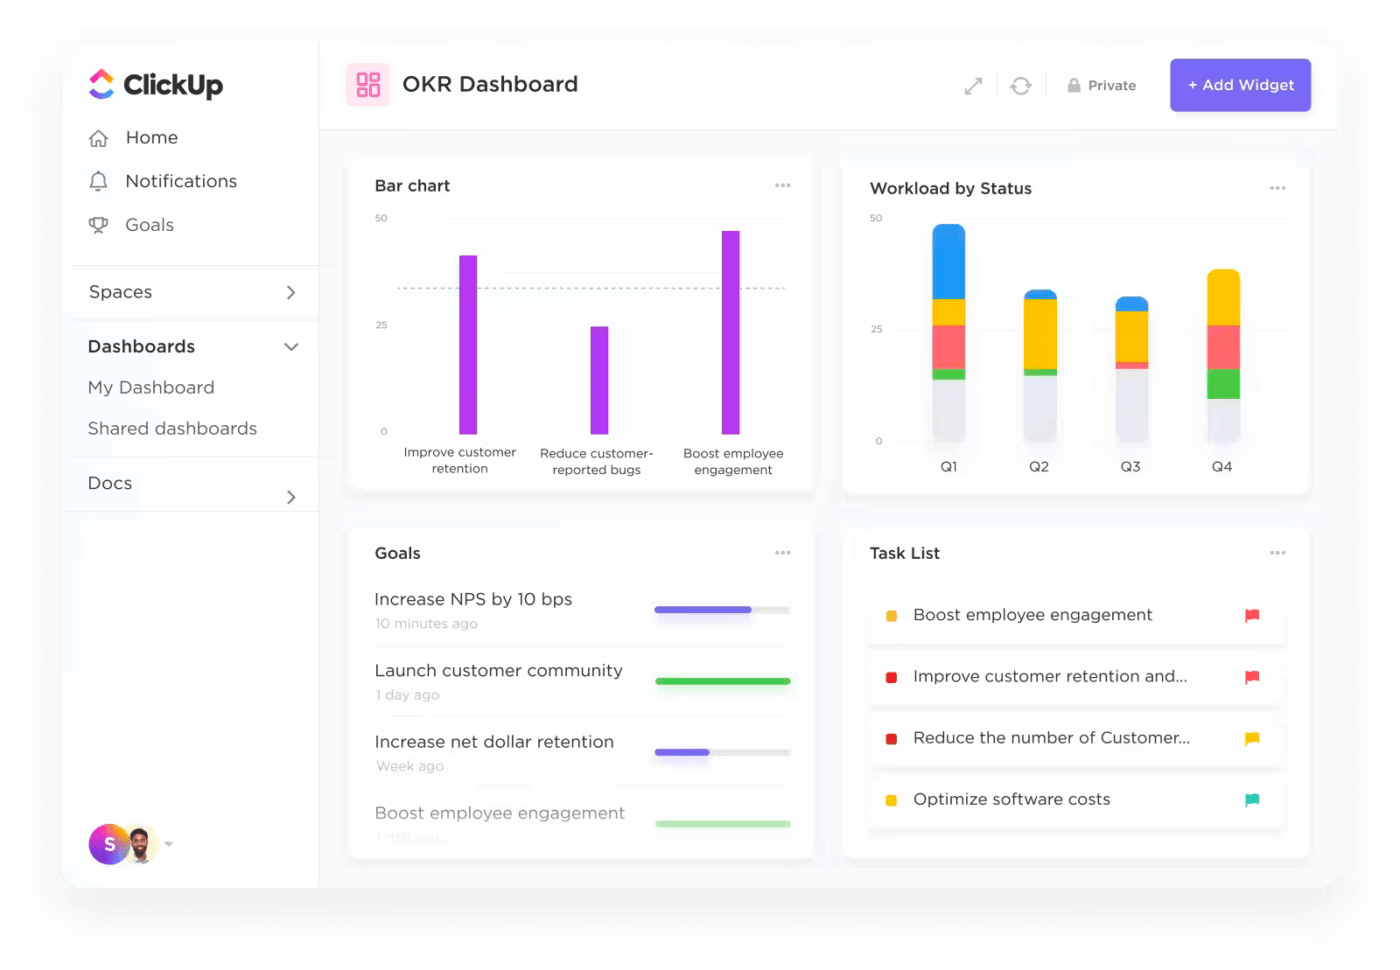 ClickUp's OKR Dashboard - part of our all-in-one project management software - tailors views for cross-functional projects, boosts efficiency through automation, and standardizes best practices for scalable success.